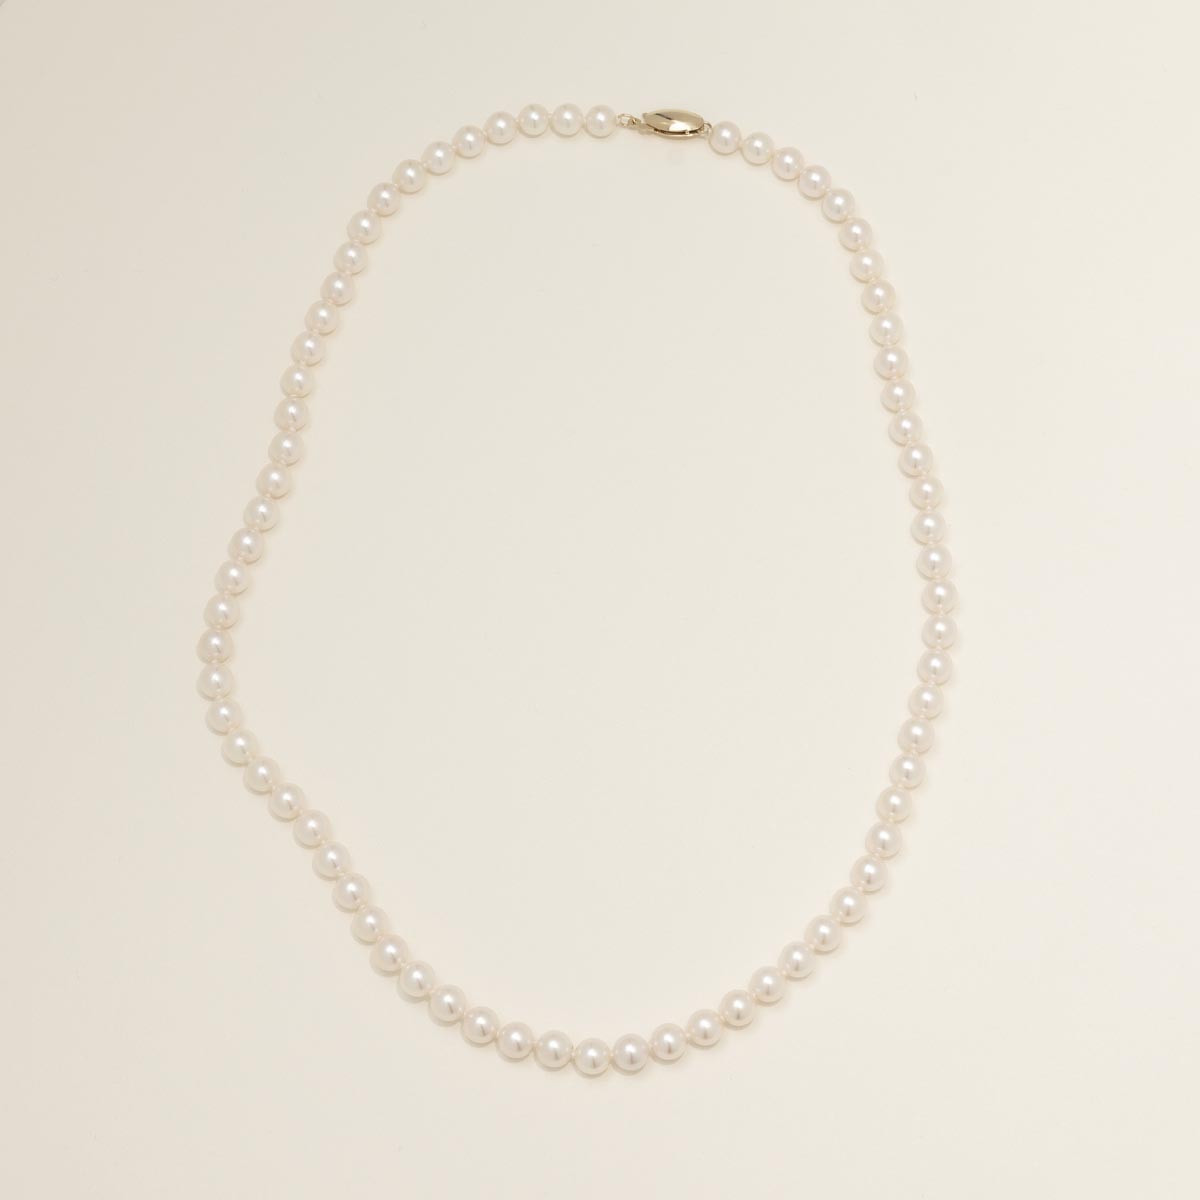 Mastoloni Cultured Akoya Pearl Strand Necklace in 14kt Yellow Gold (5.5-6mm pearls)